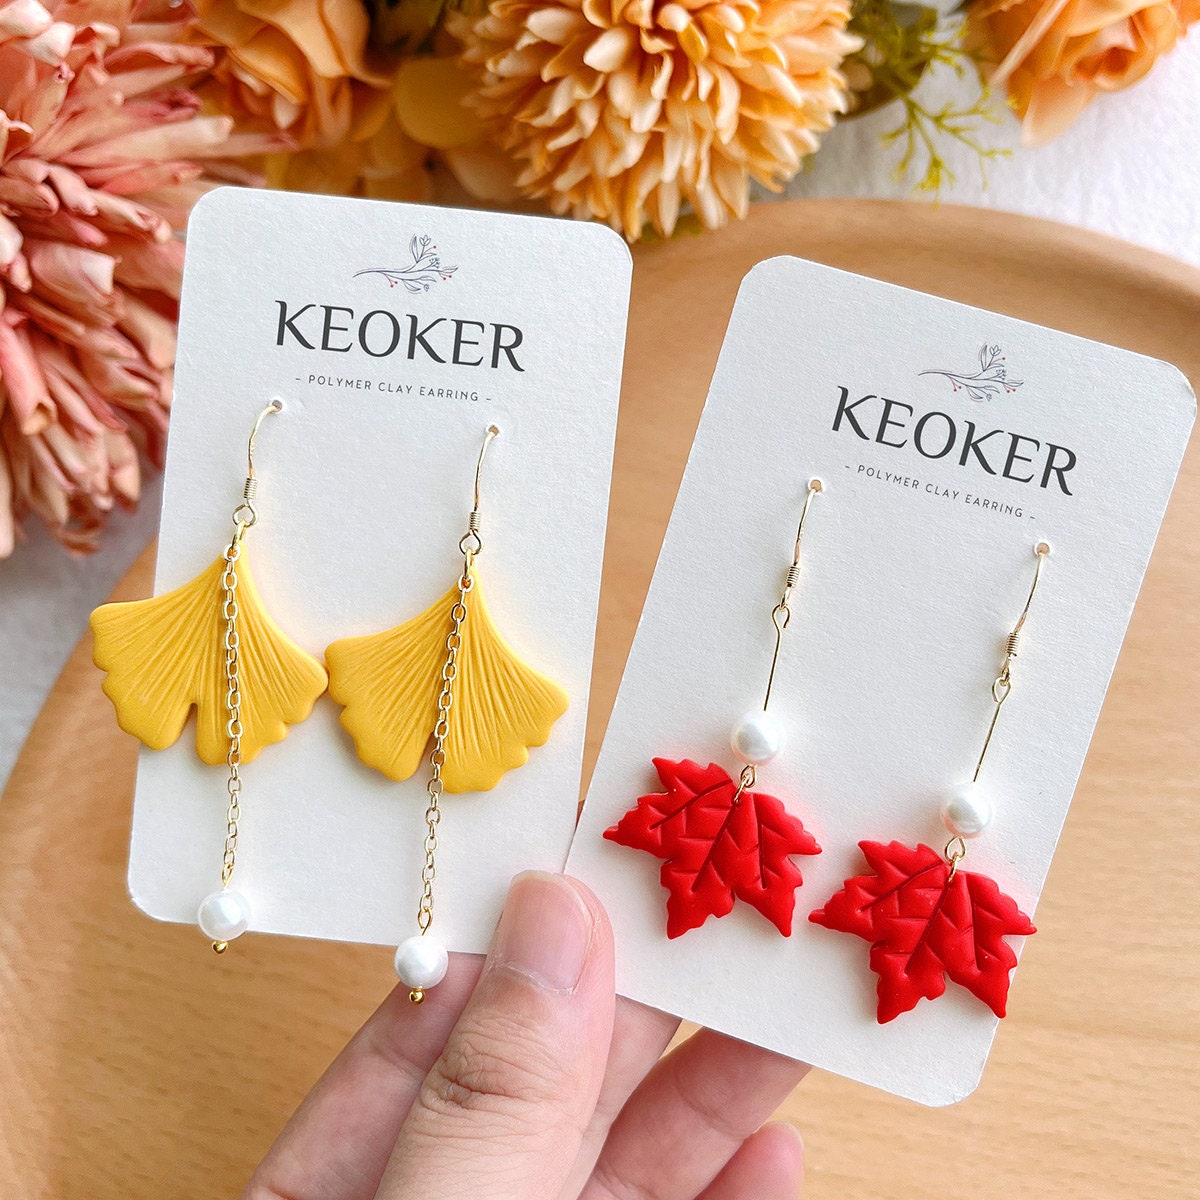  Keoker Mini Polymer Clay Cutters Halloween - Mini Fall Clay  Cutters for Earrings Making, Maple Leaf Autumn Clay Earrings Cutters, Clay  Cutters for Polymer Clay Jewelry : Arts, Crafts & Sewing